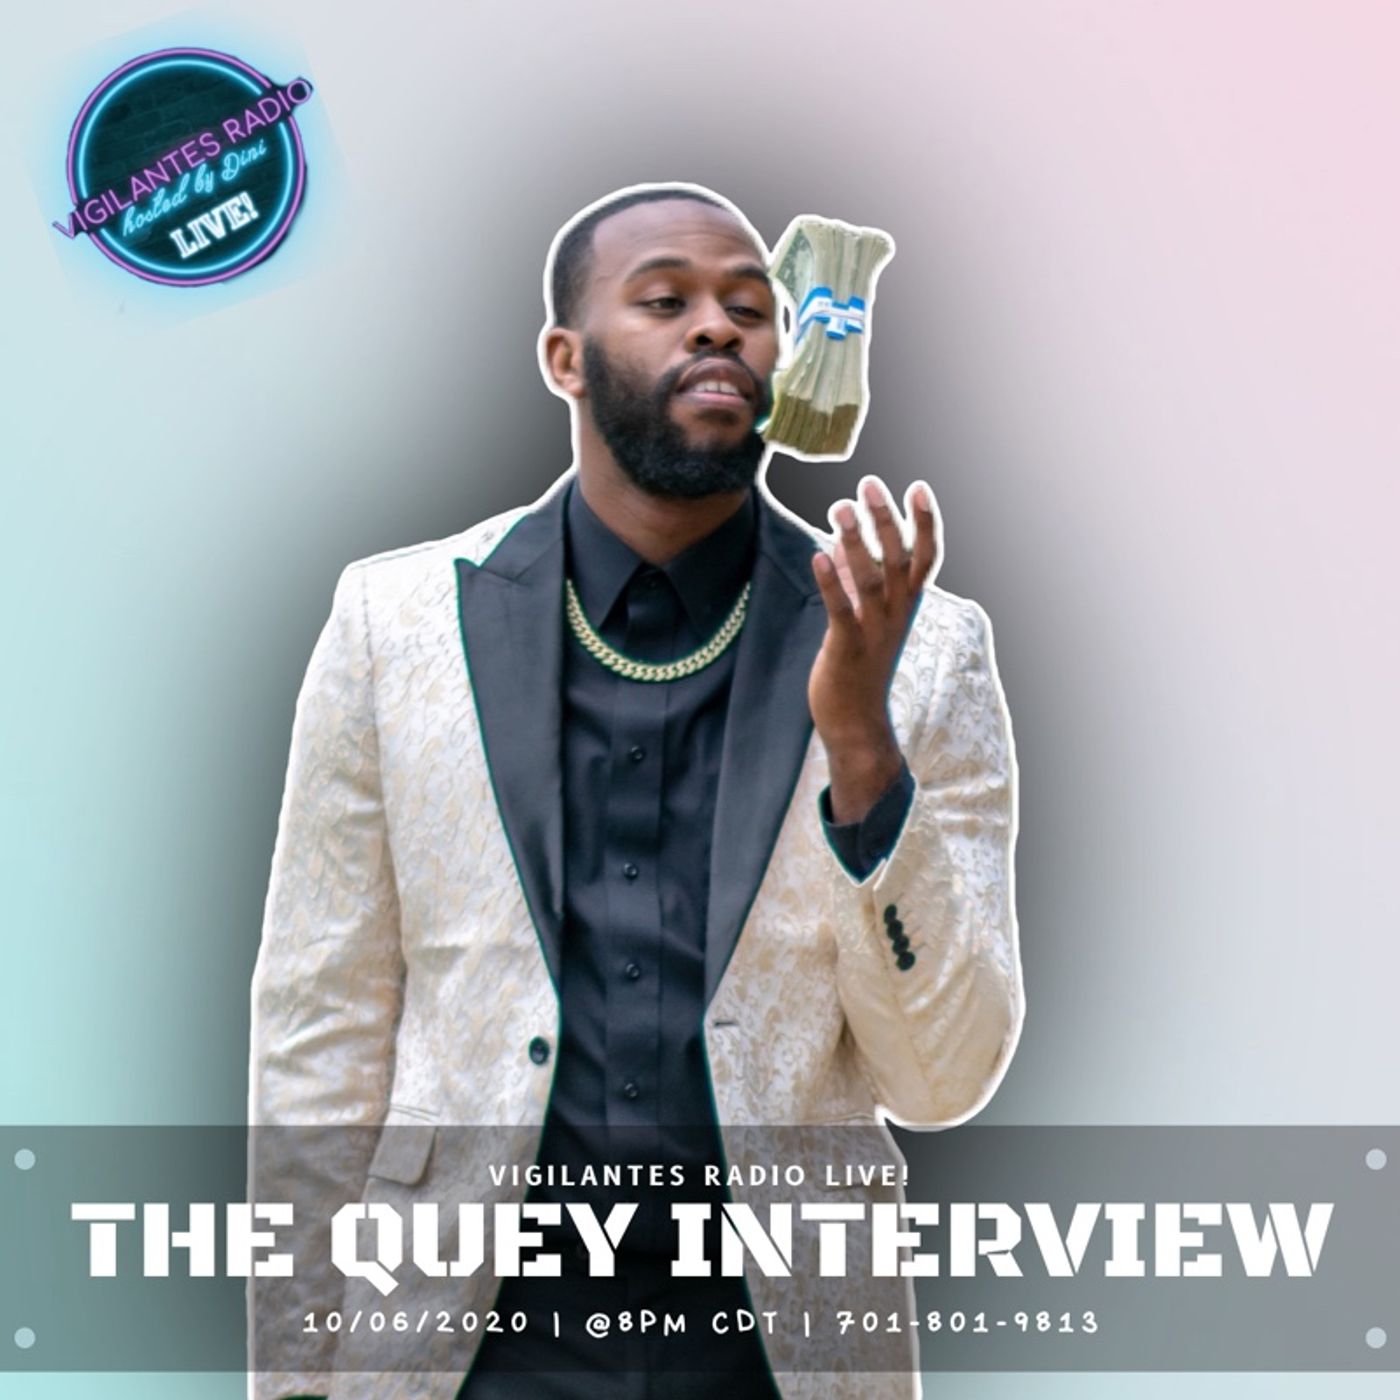 The Quey Interview. Image